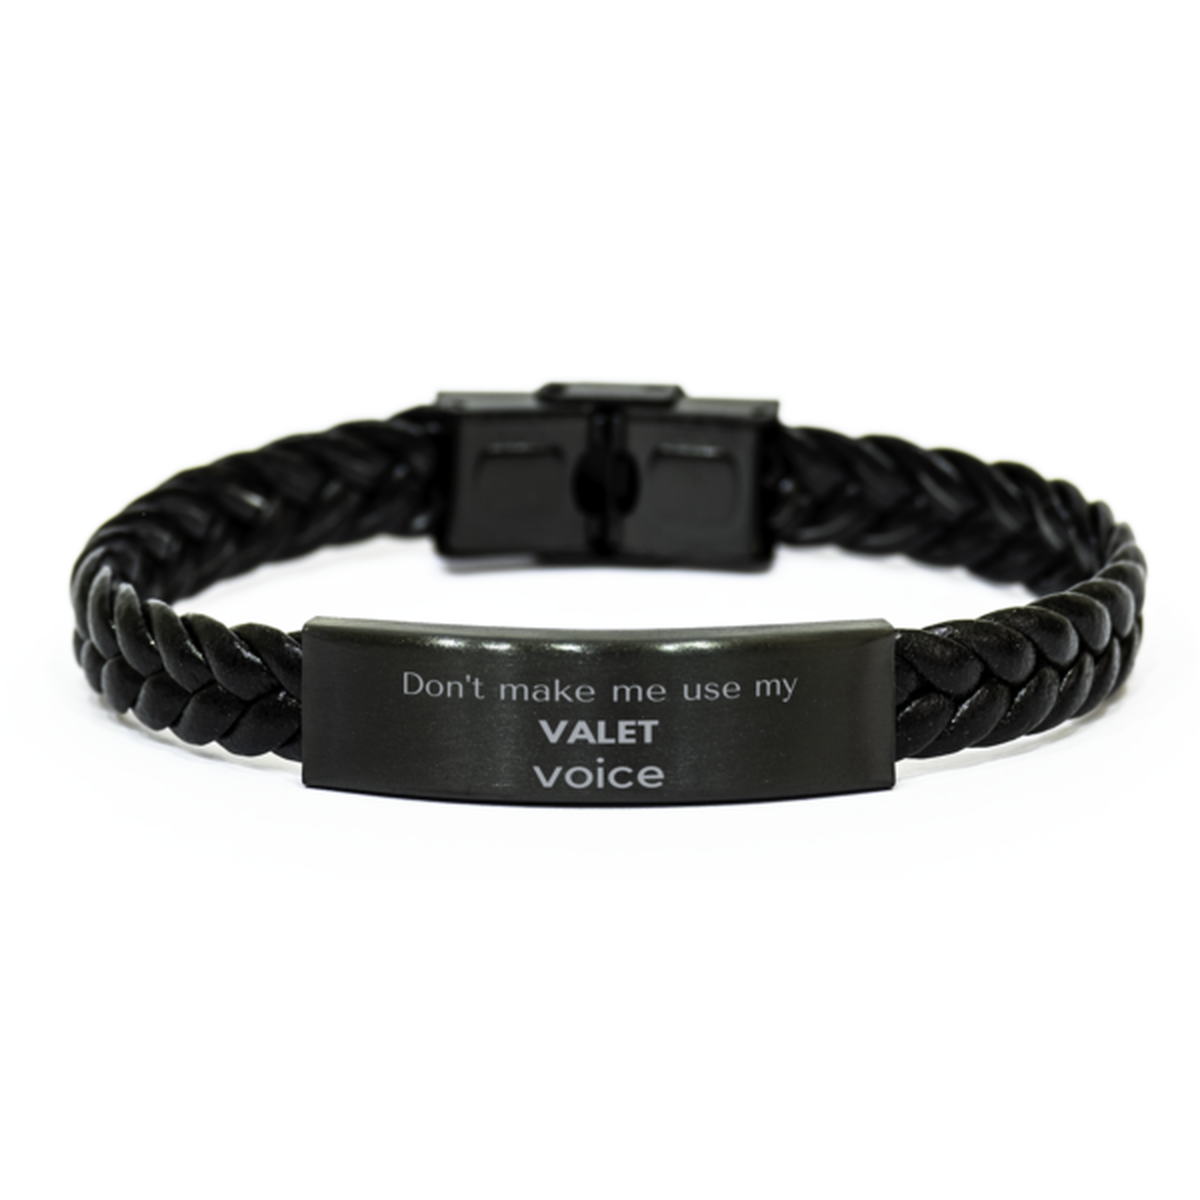 Don't make me use my Valet voice, Sarcasm Valet Gifts, Christmas Valet Braided Leather Bracelet Birthday Unique Gifts For Valet Coworkers, Men, Women, Colleague, Friends